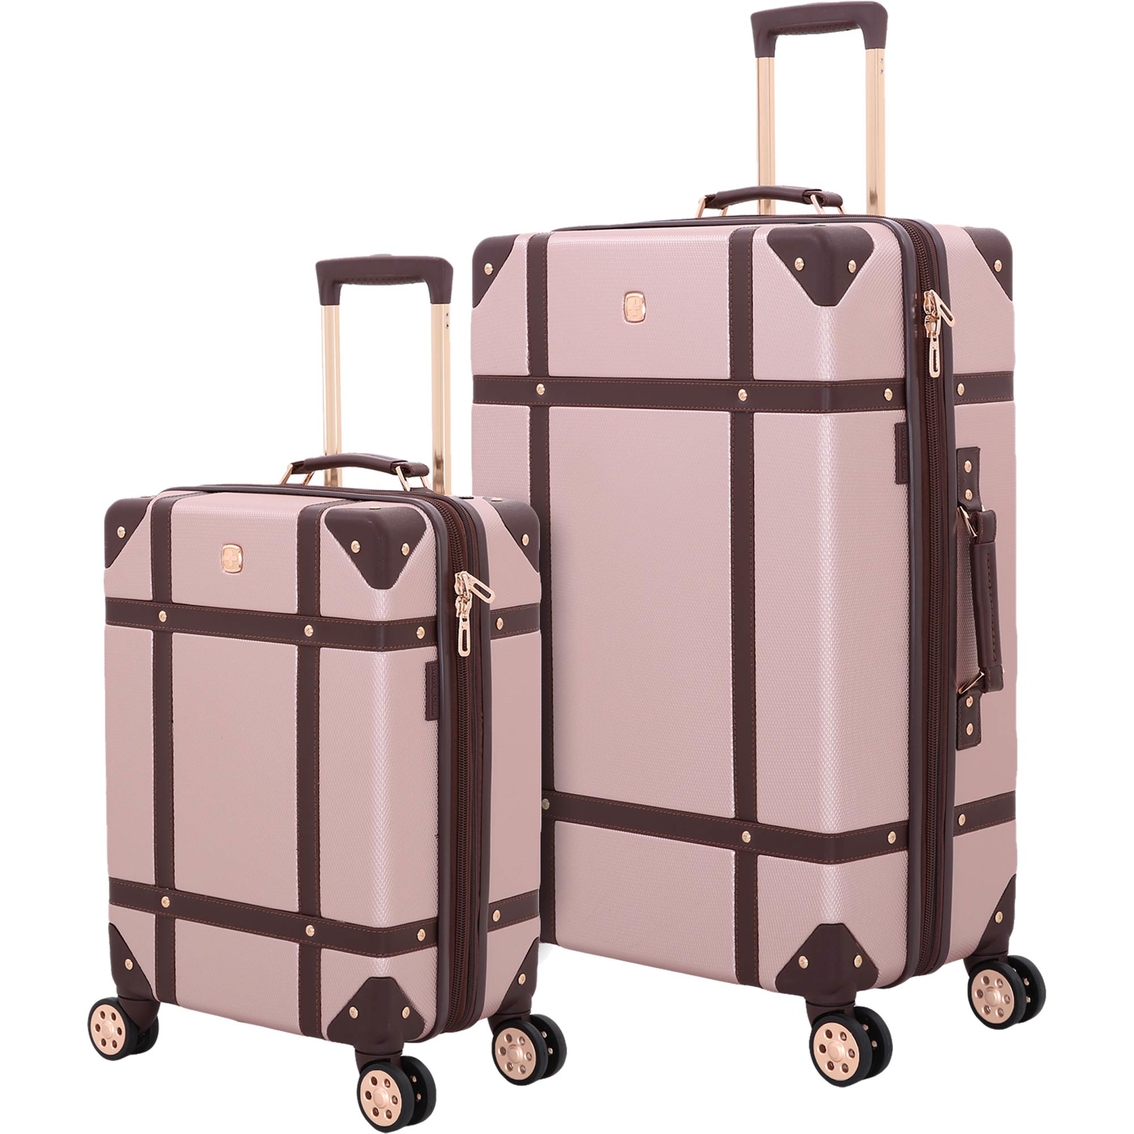 Swissgear Hardside Trunk Expandable Carry On Suitcase - 19 - Blush Peach